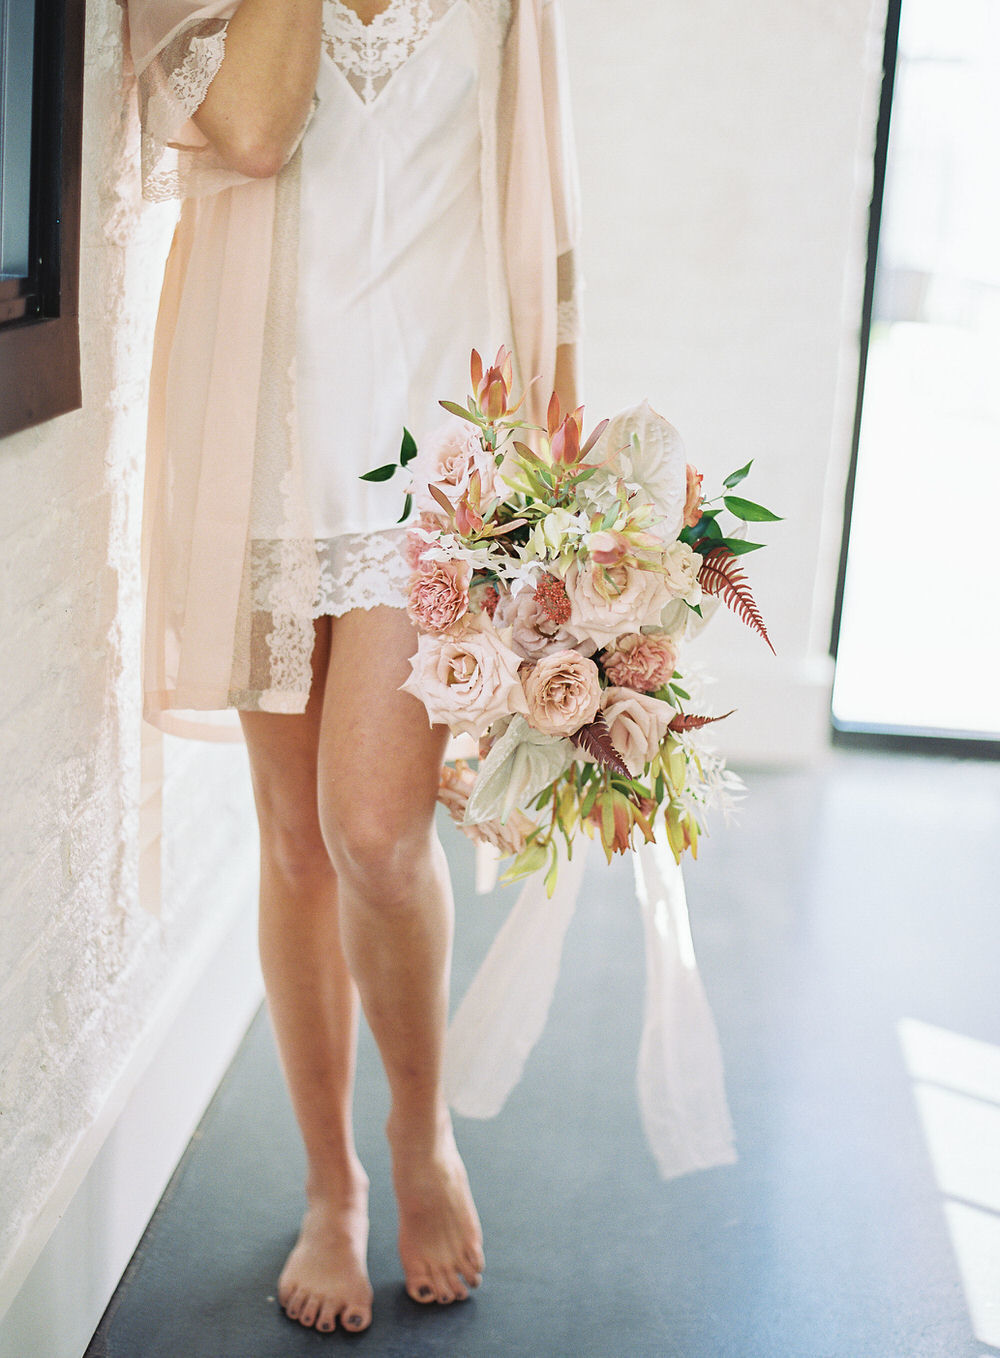 Earthy Tones Wedding Inspiration in Old Quebec City ⋆ Ruffled